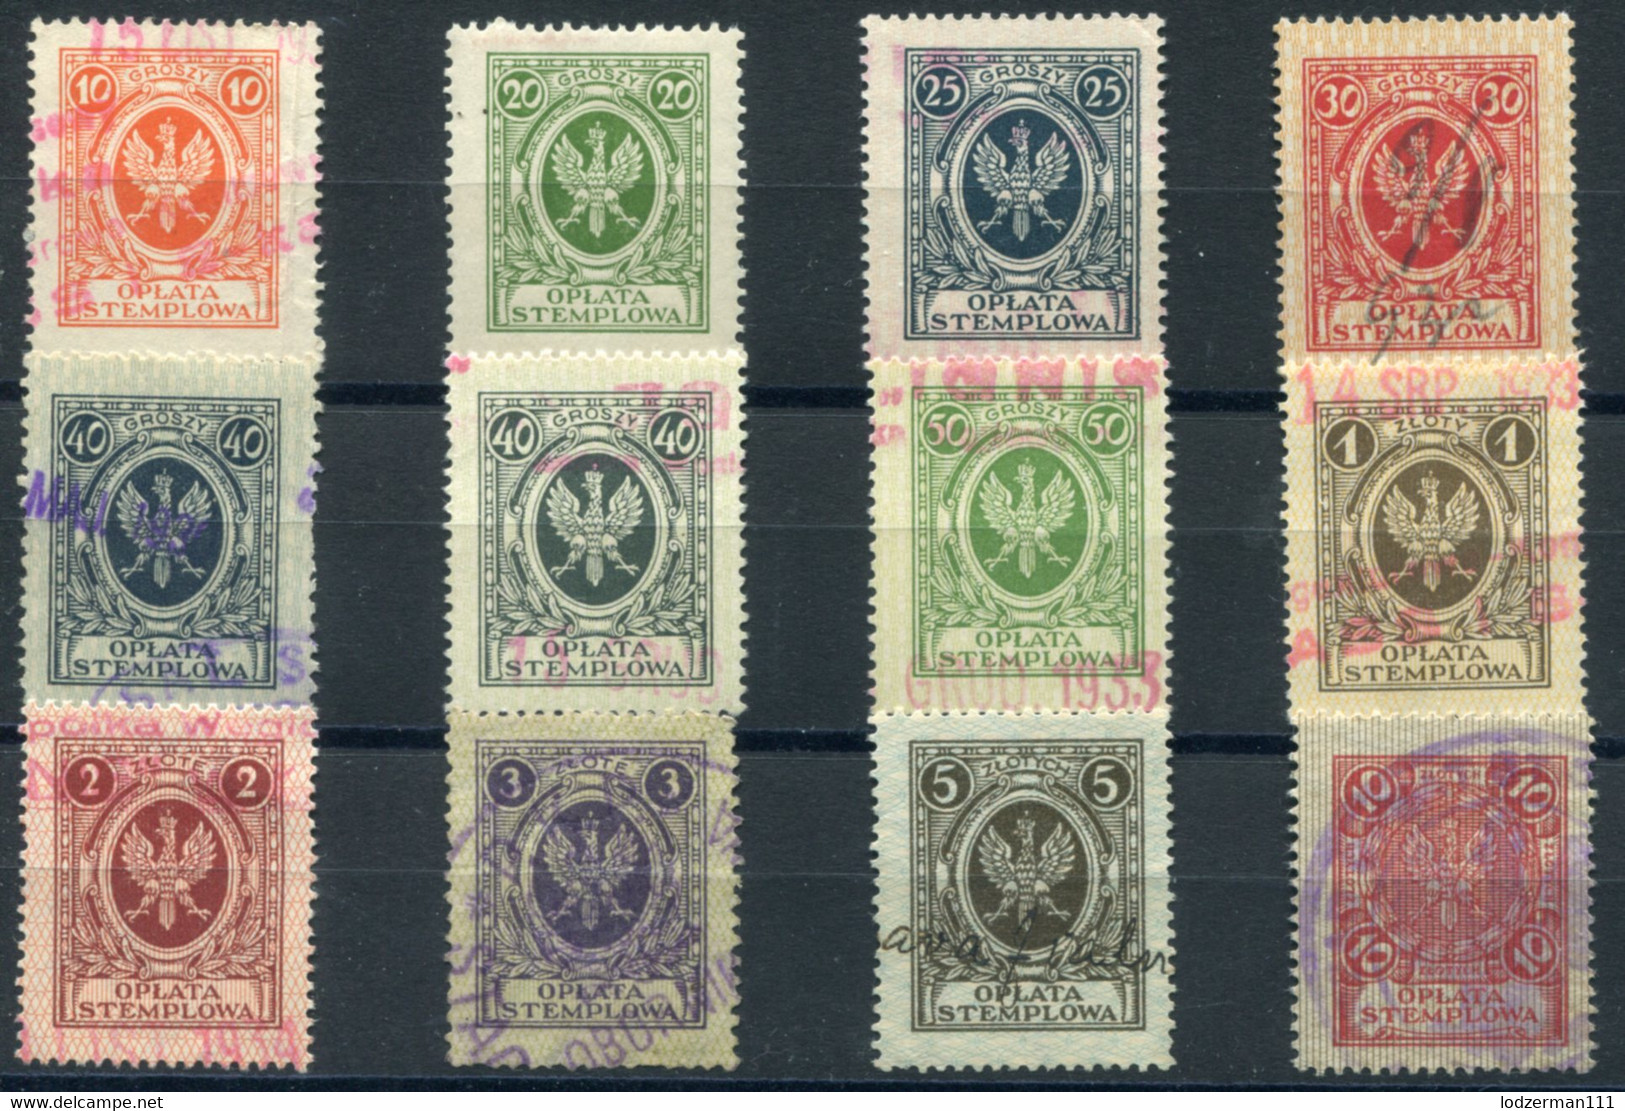 1927 General Zloty Issue #85-96 Compl. Set Used (1 MNH) All VF - Steuermarken